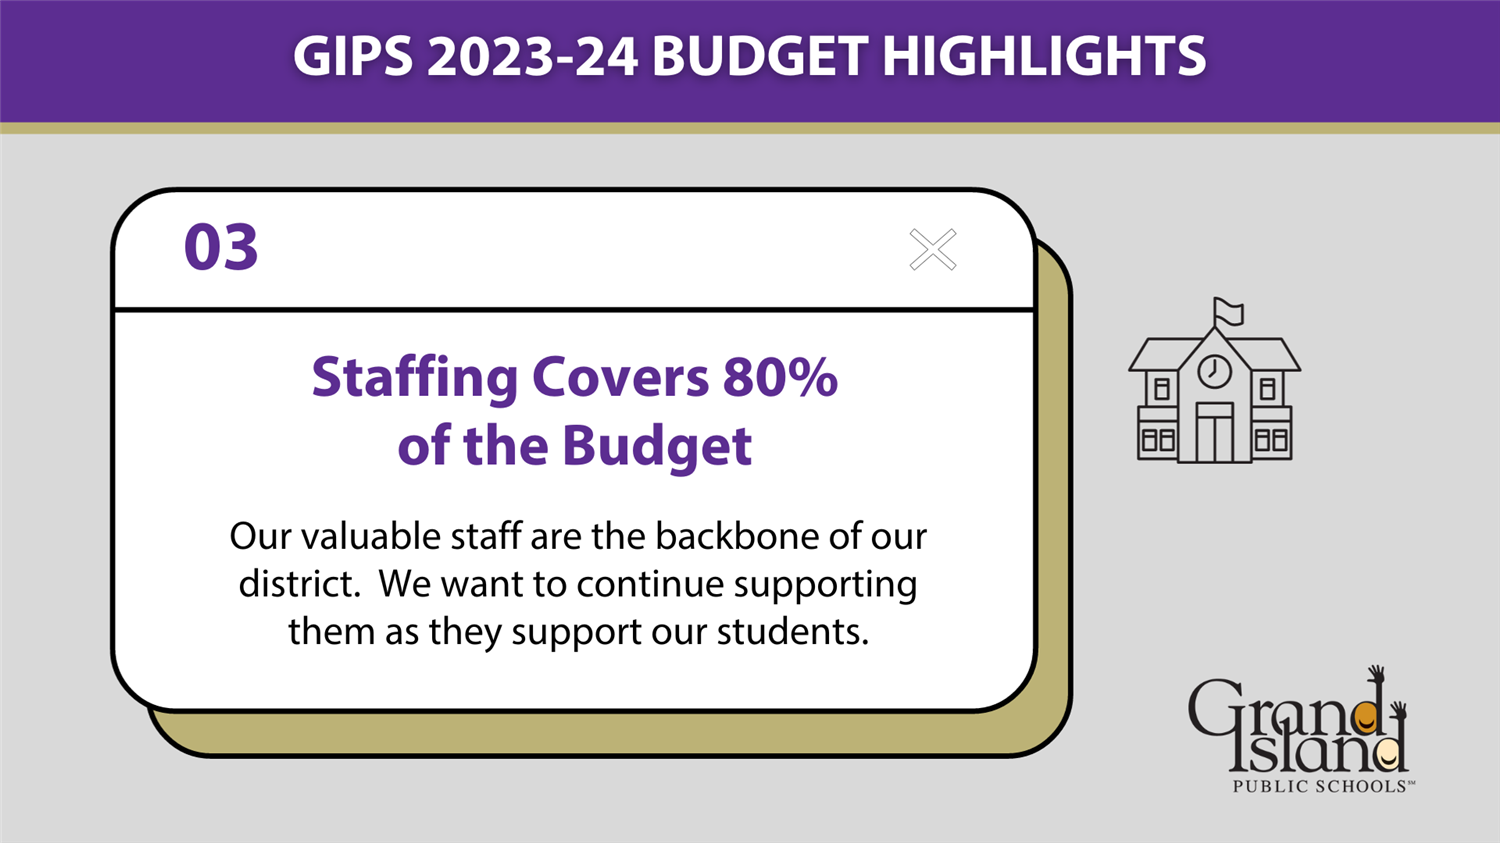 GIPS Budget Highlight 03 - Staffing Covers 80% of the Budget